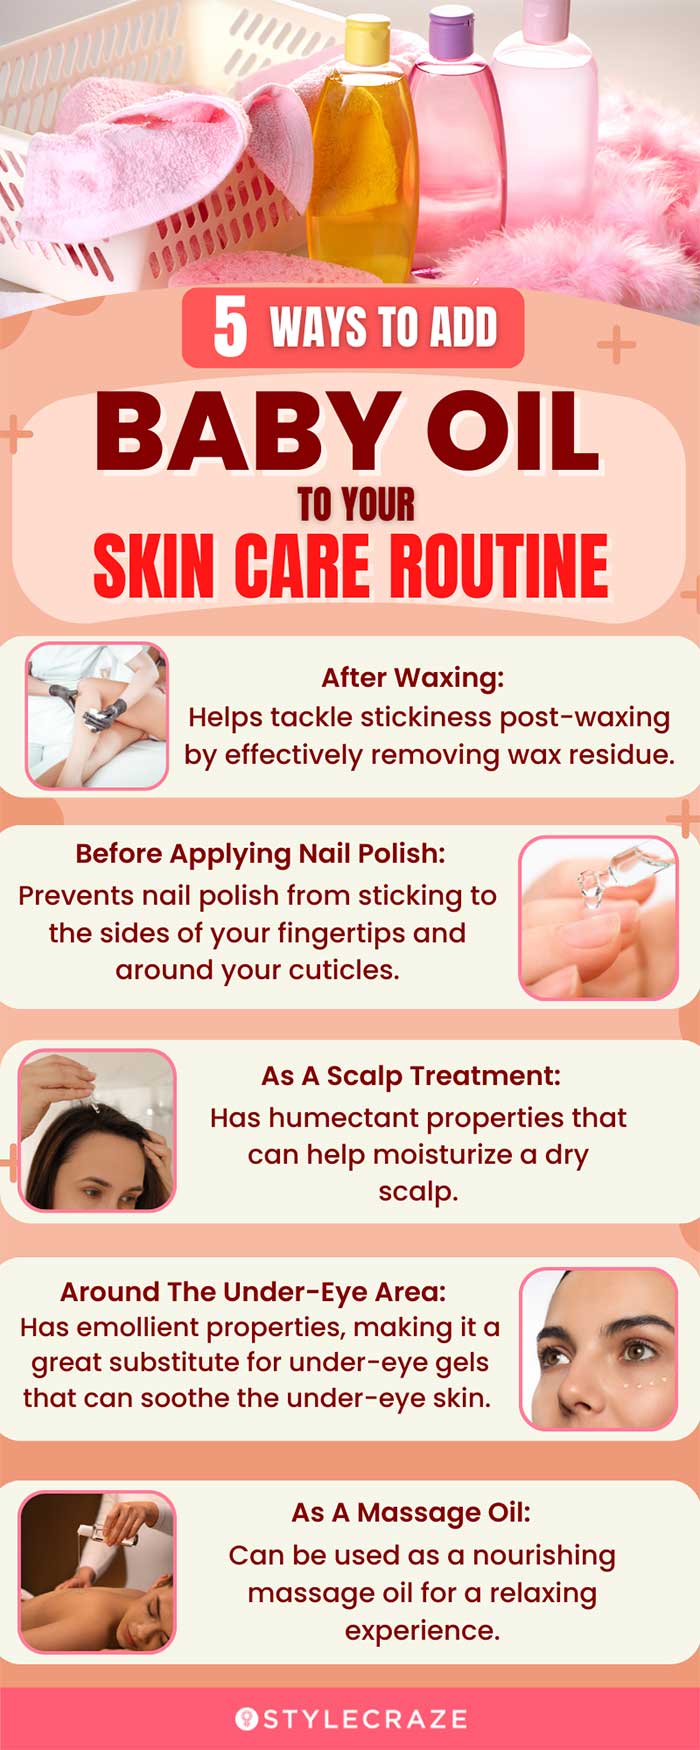 5 ways to add baby oil to your skincare routine (infographic)